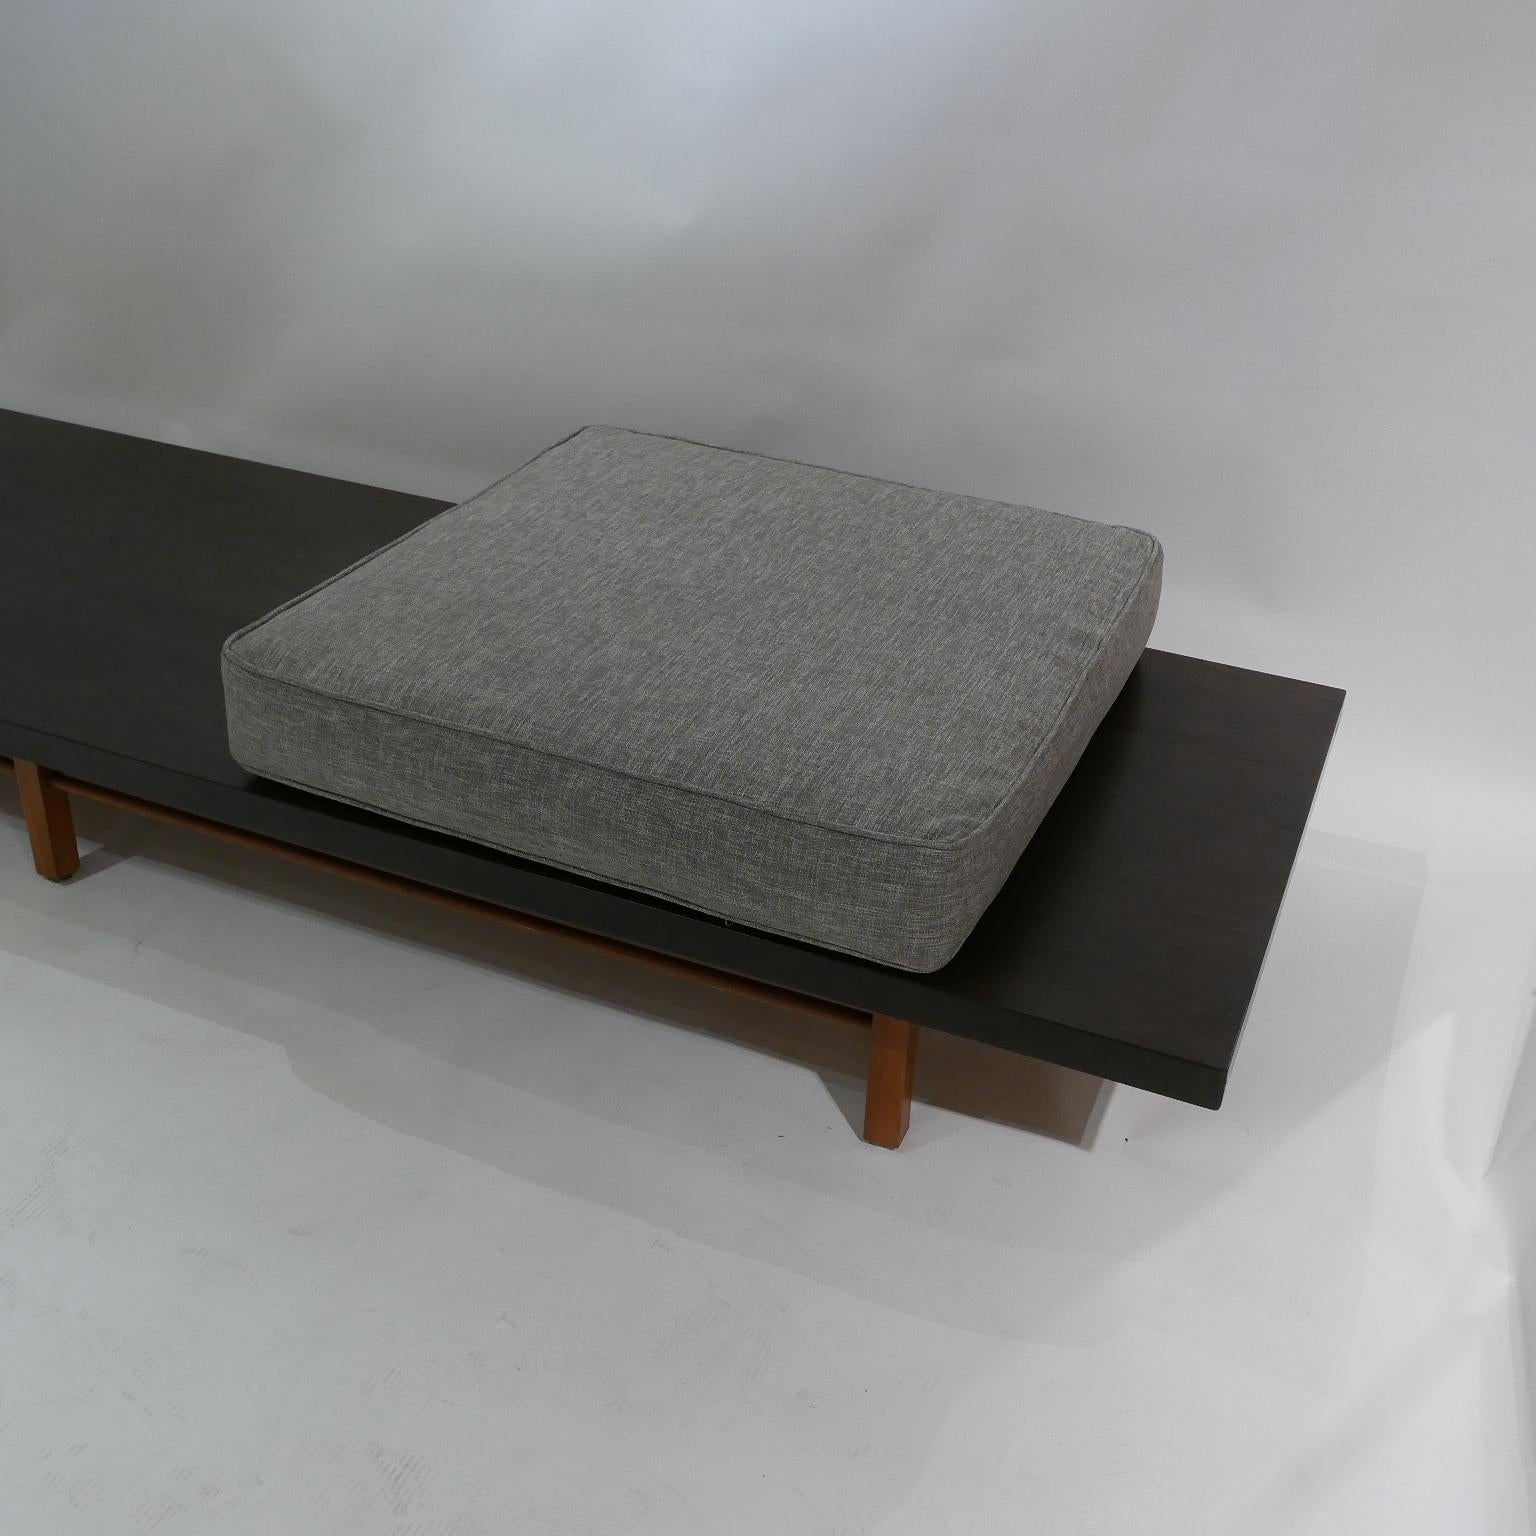 Milo Baughman for Thayer Coggin Monumental Low Table or Bench with Cushions 1